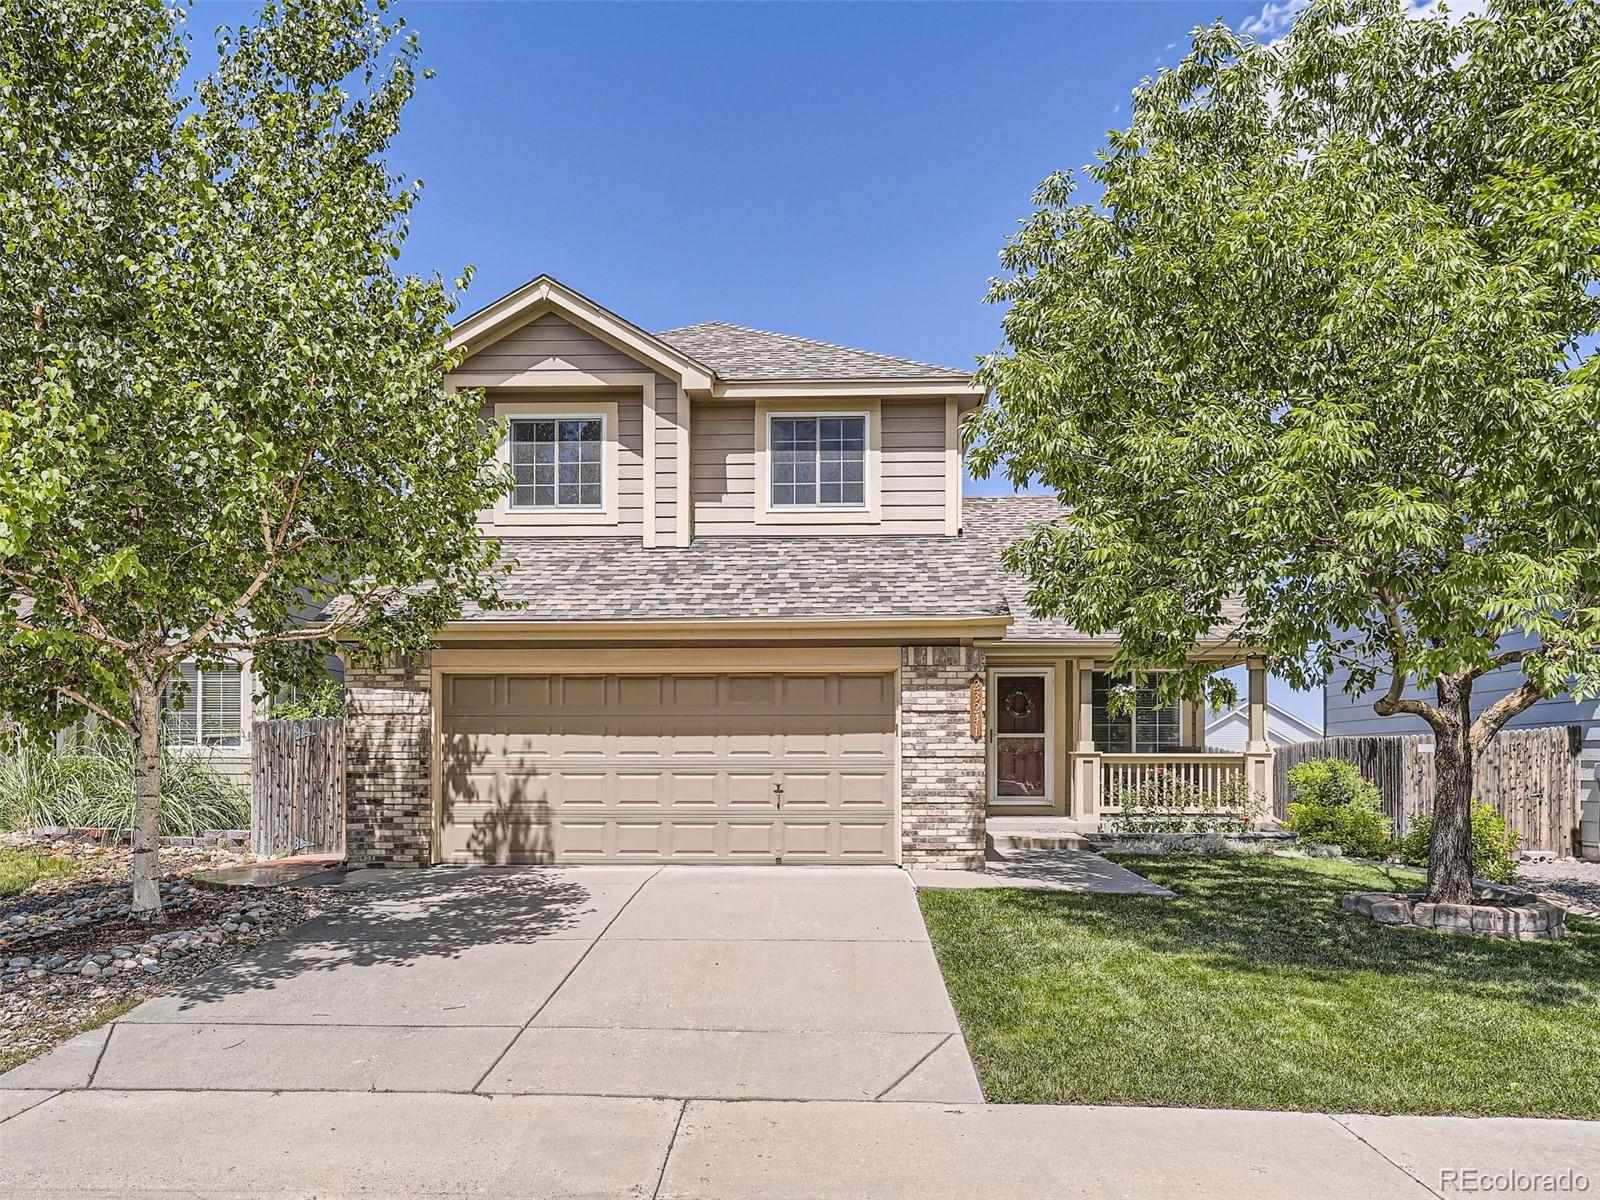 23241 E Orchard Place, aurora MLS: 3430360 Beds: 3 Baths: 3 Price: $530,000